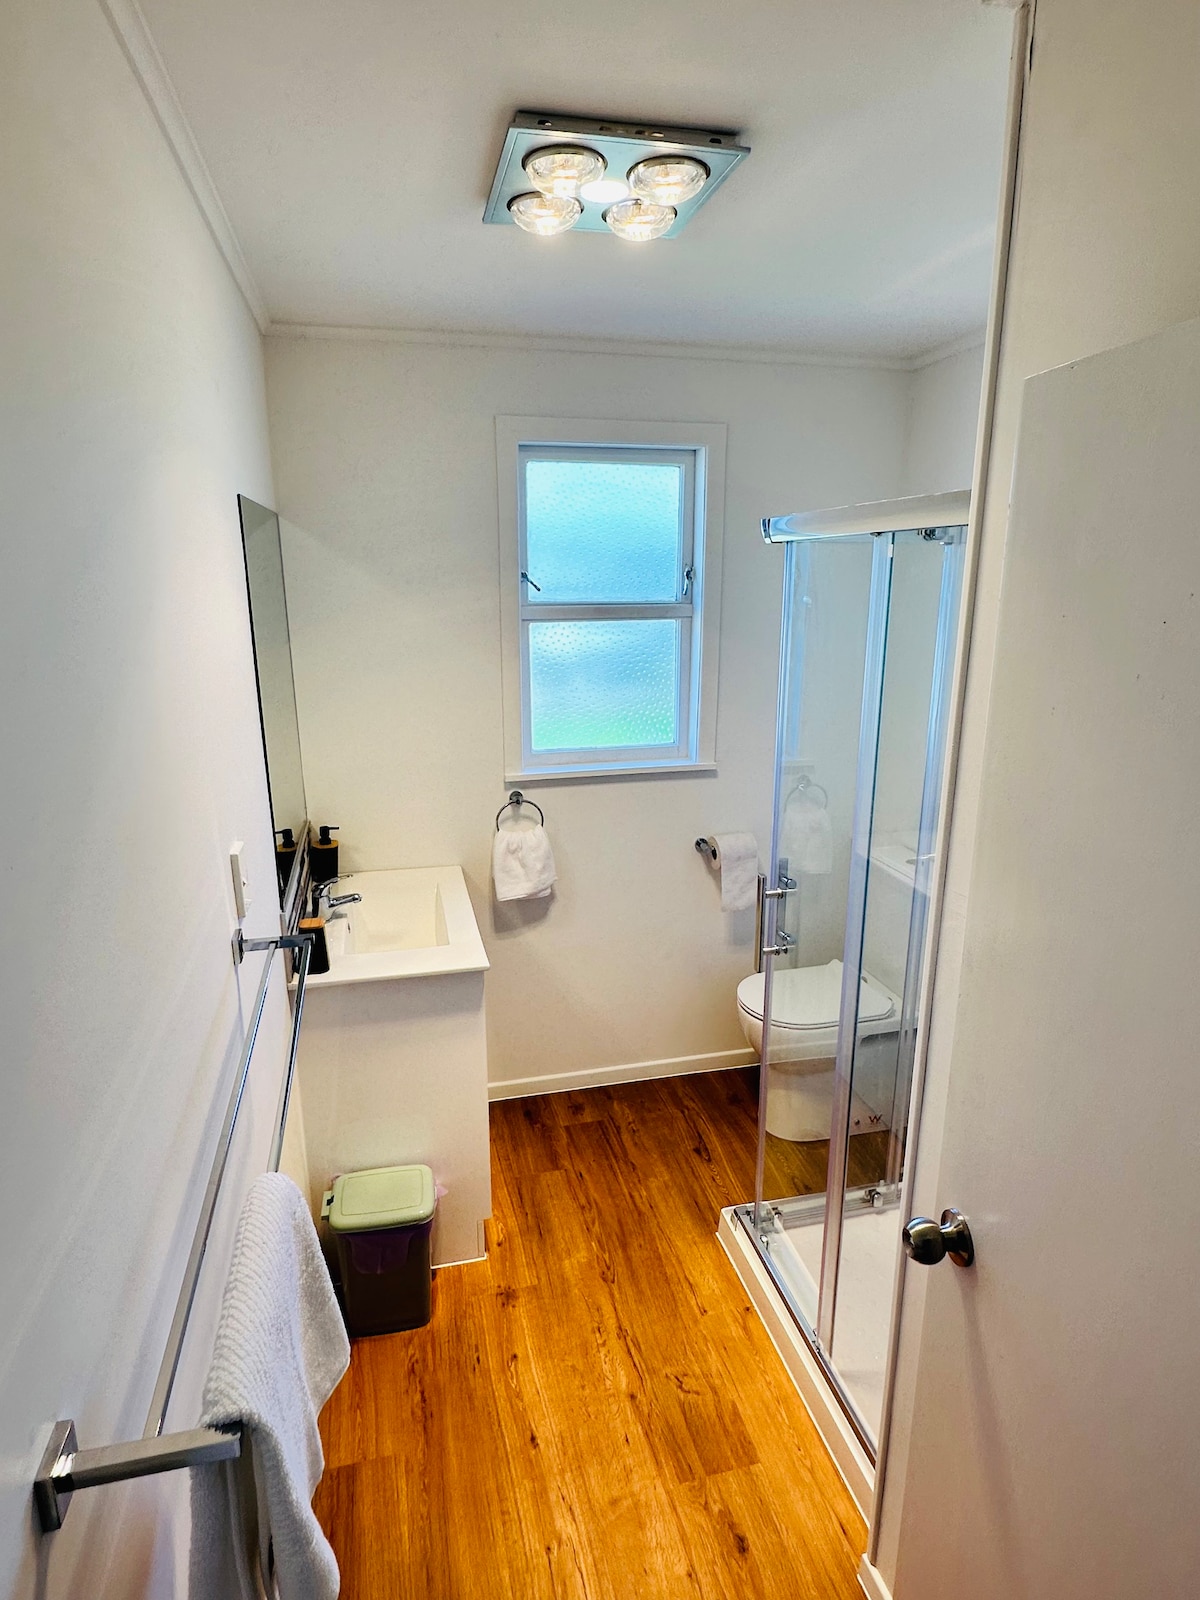 Lovely 2 bedroom stay in Manukau